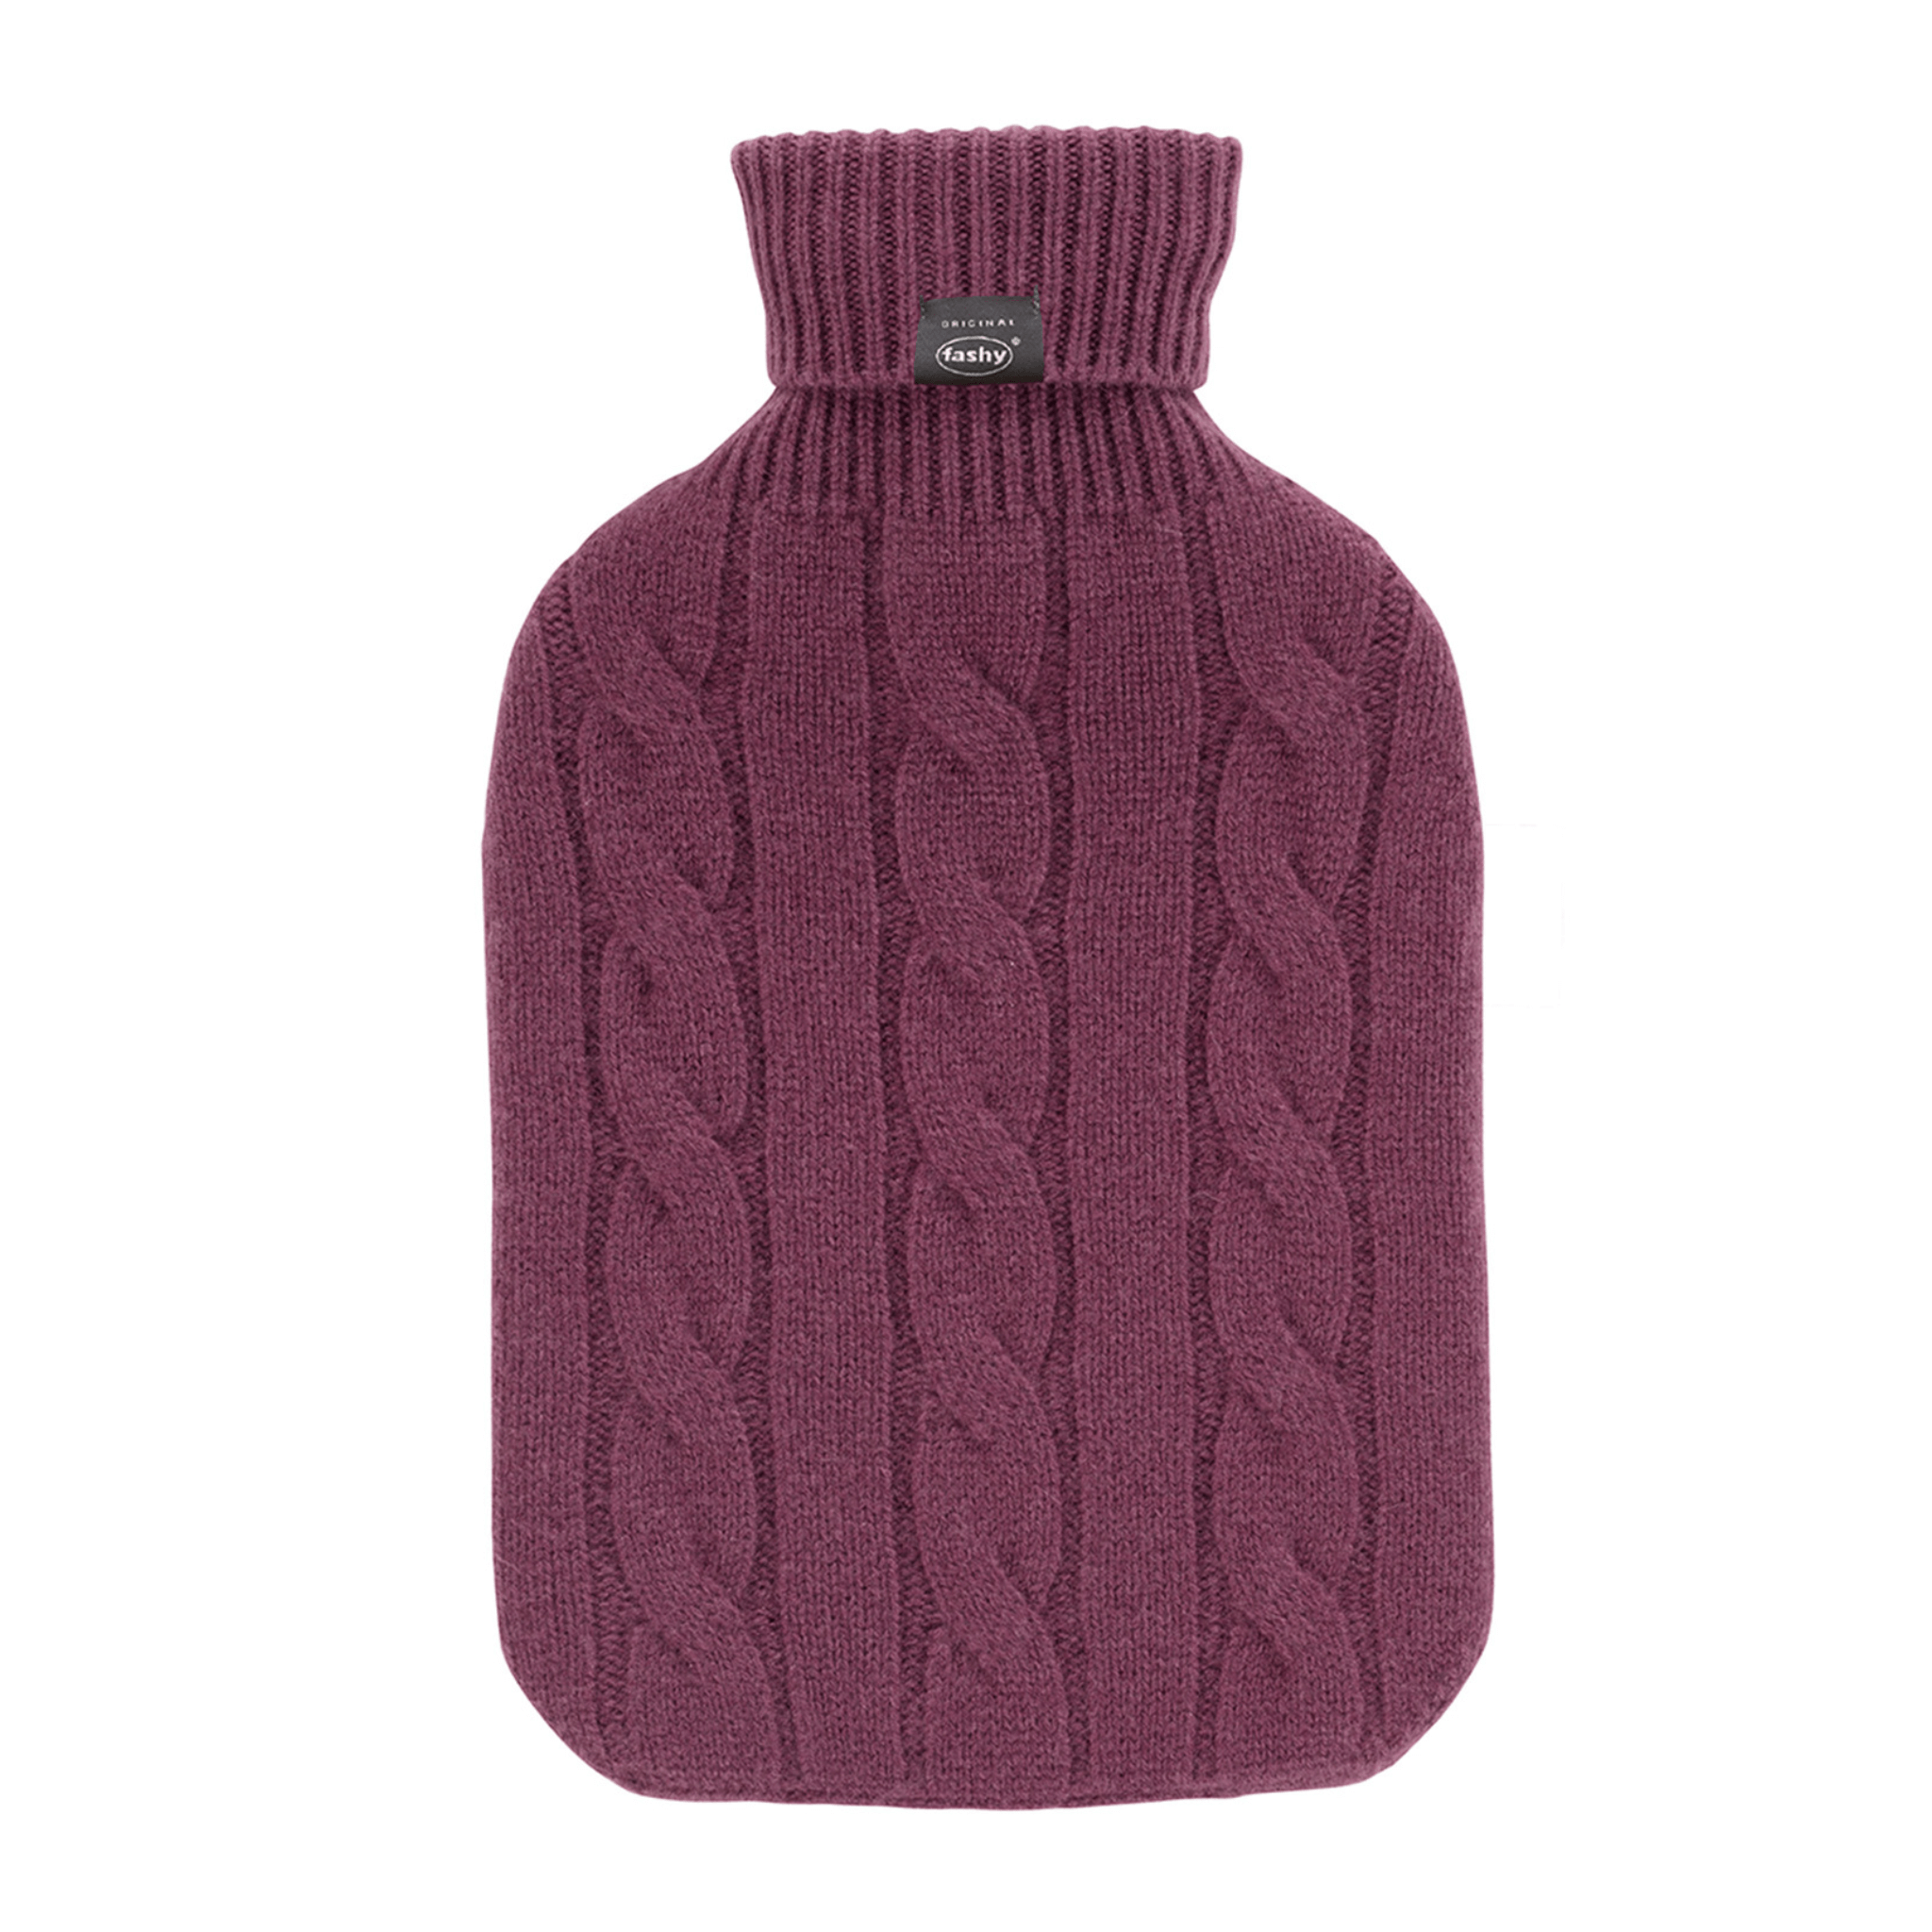 2 Litre Fashy Hot Water Bottle with Wine Plaid Knit Cashmere Cover